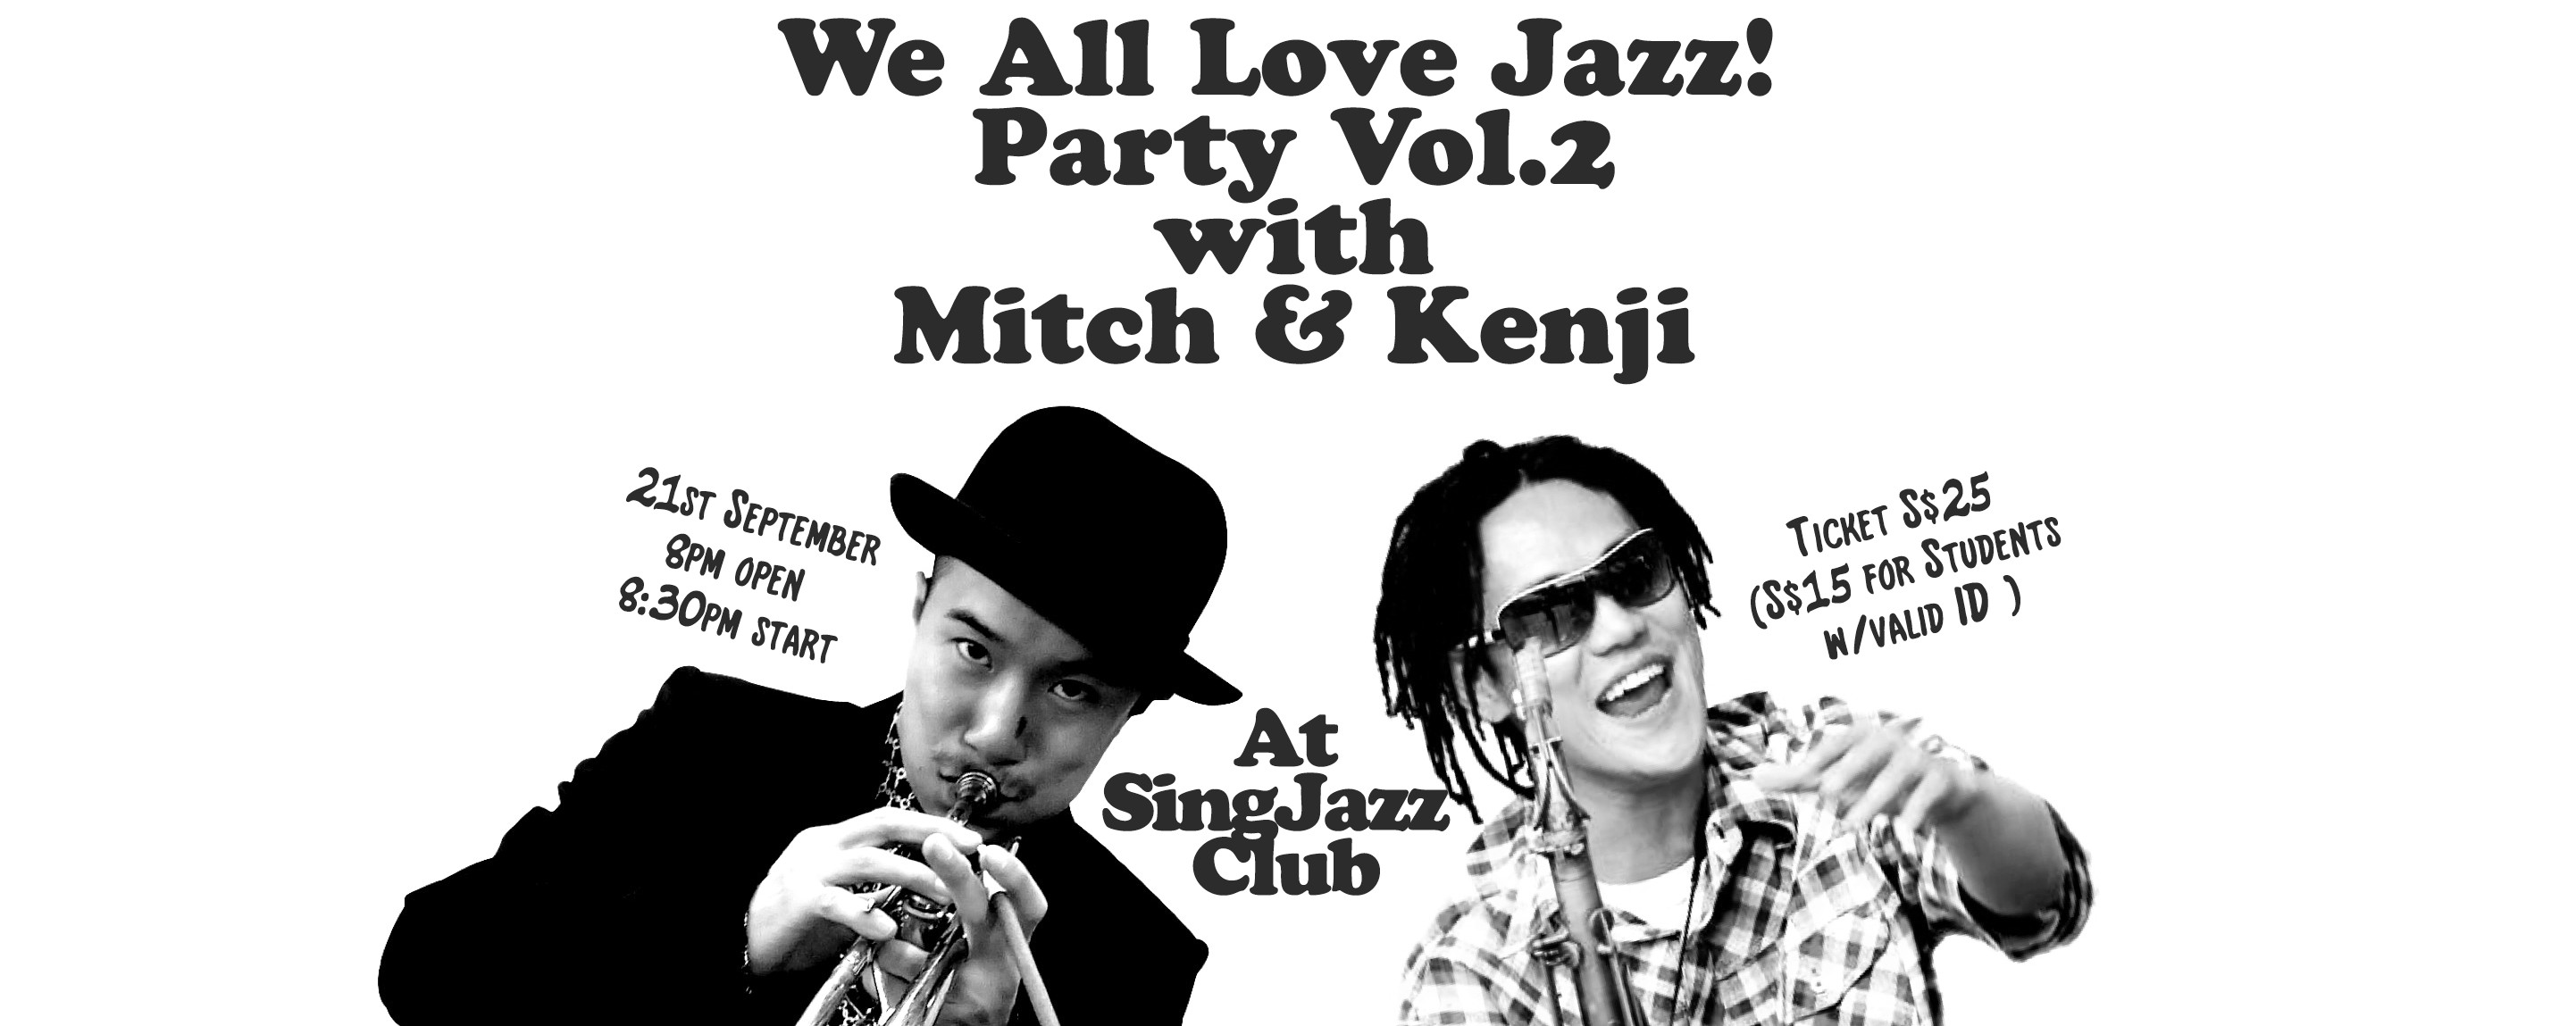 'WE ALL LOVE JAZZ!' PARTY Vol.2